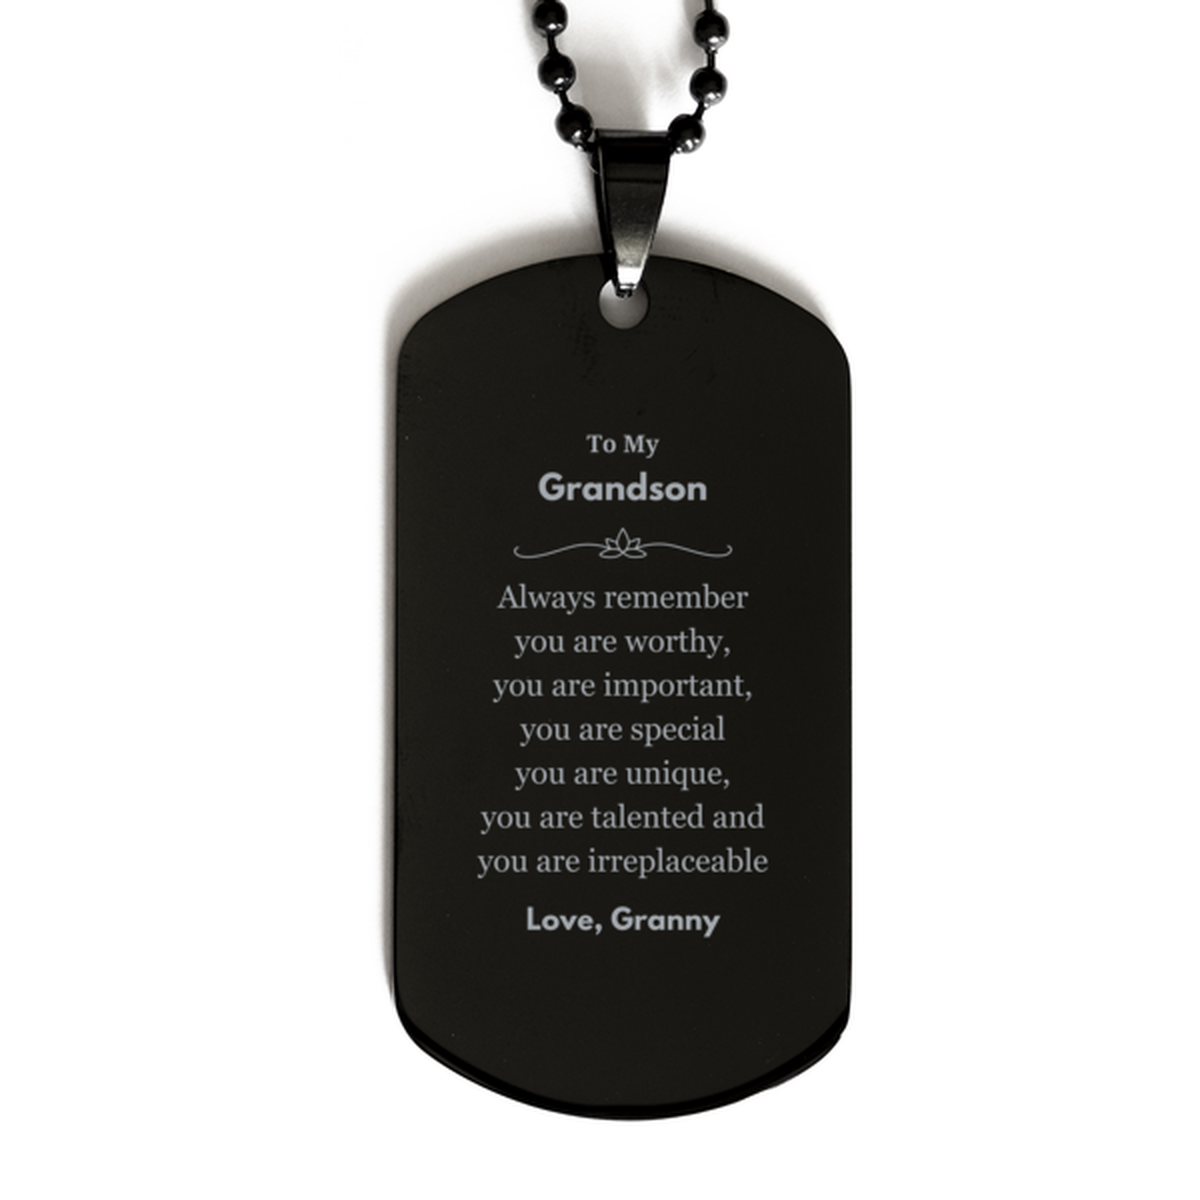 Grandson Birthday Gifts from Granny, Inspirational Black Dog Tag for Grandson Christmas Graduation Gifts for Grandson Always remember you are worthy, you are important. Love, Granny